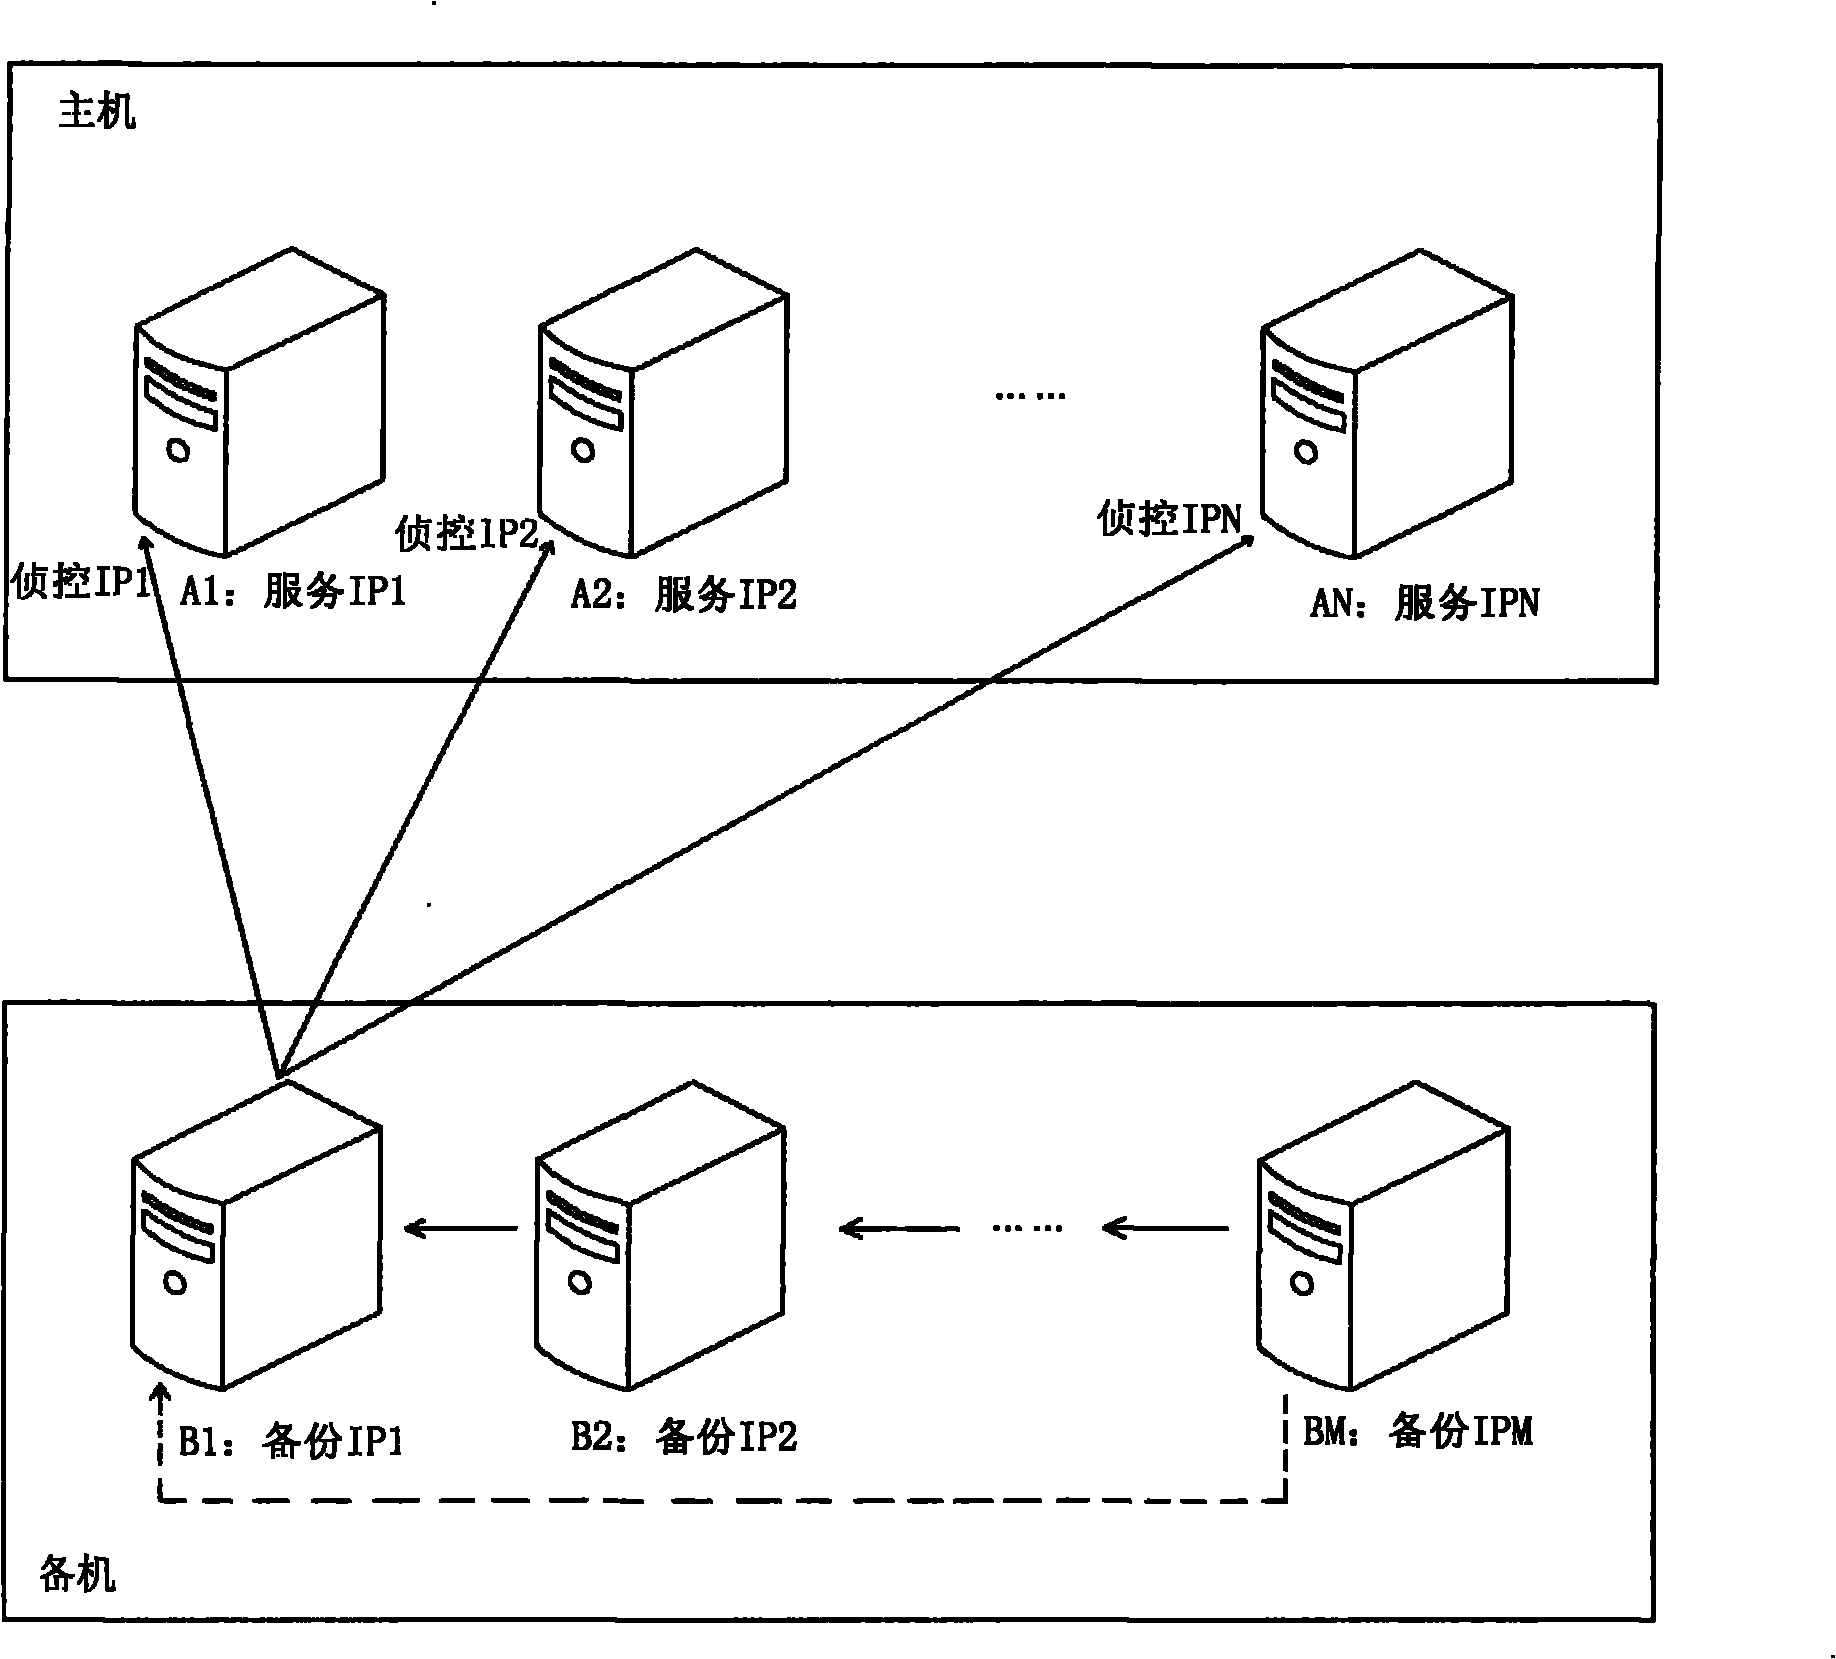 N+M service backup mechanism based on IP switching